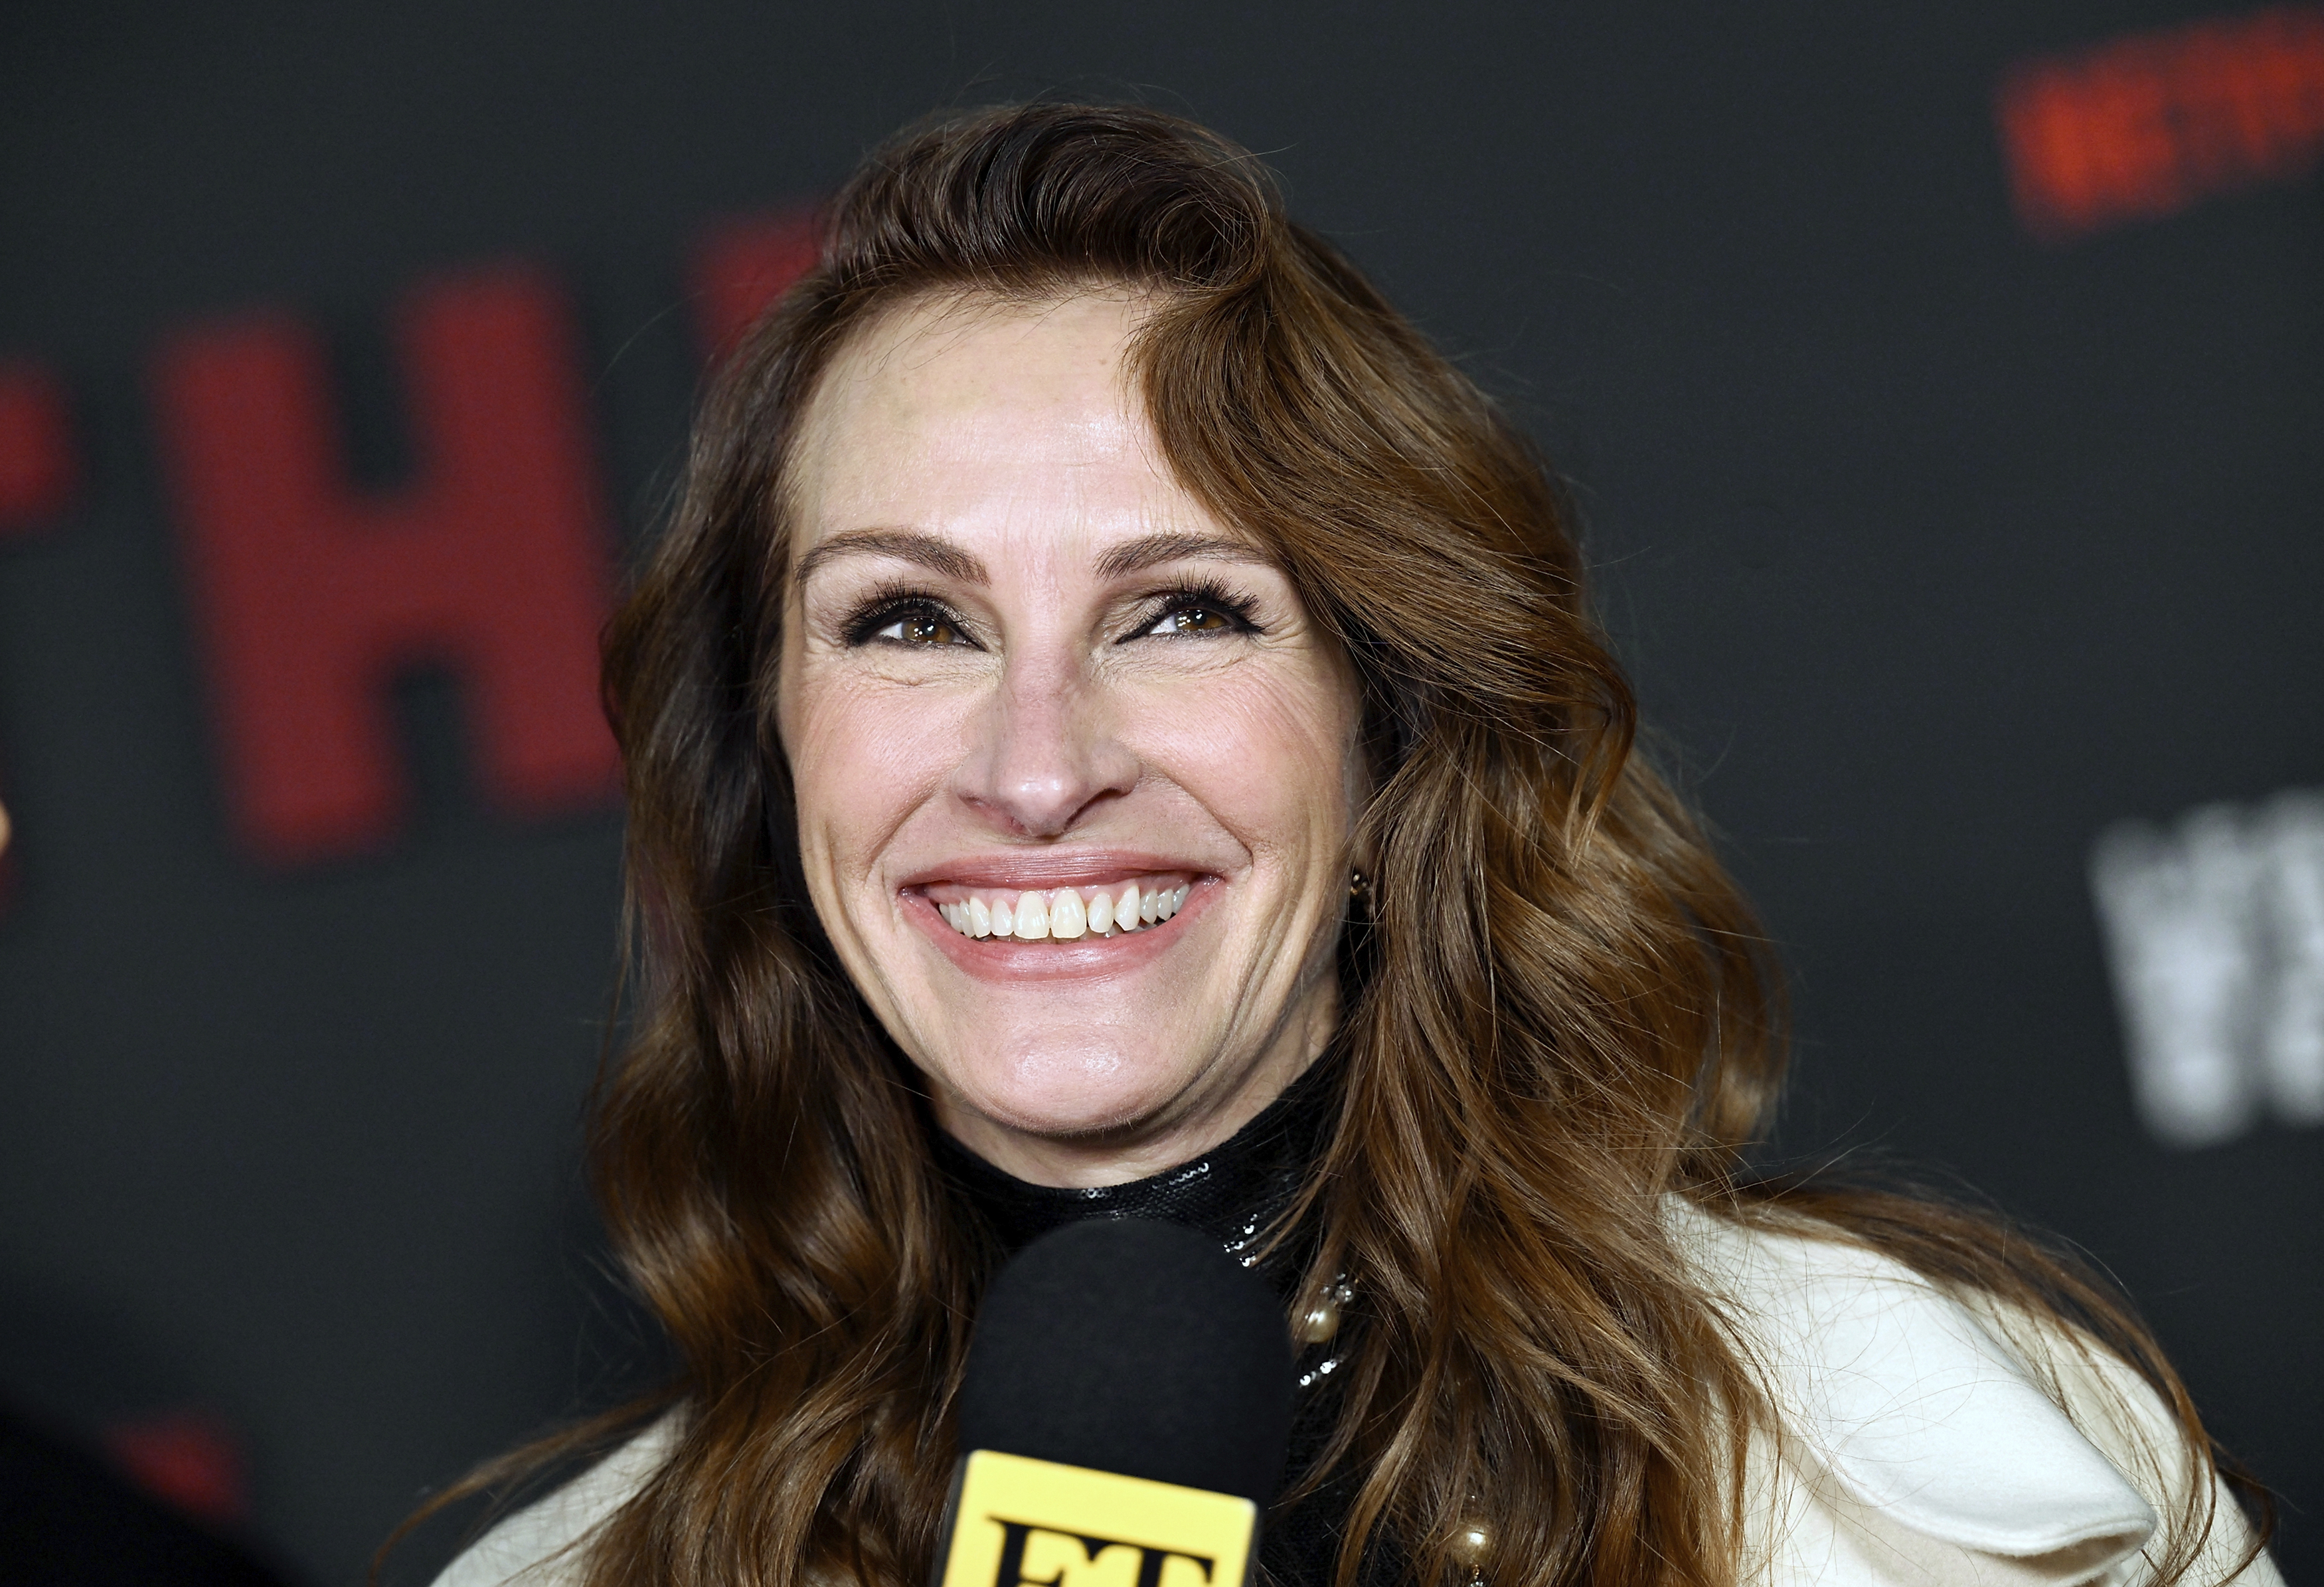 Having been famous for more than 30 years, Julia Roberts has star power like no other